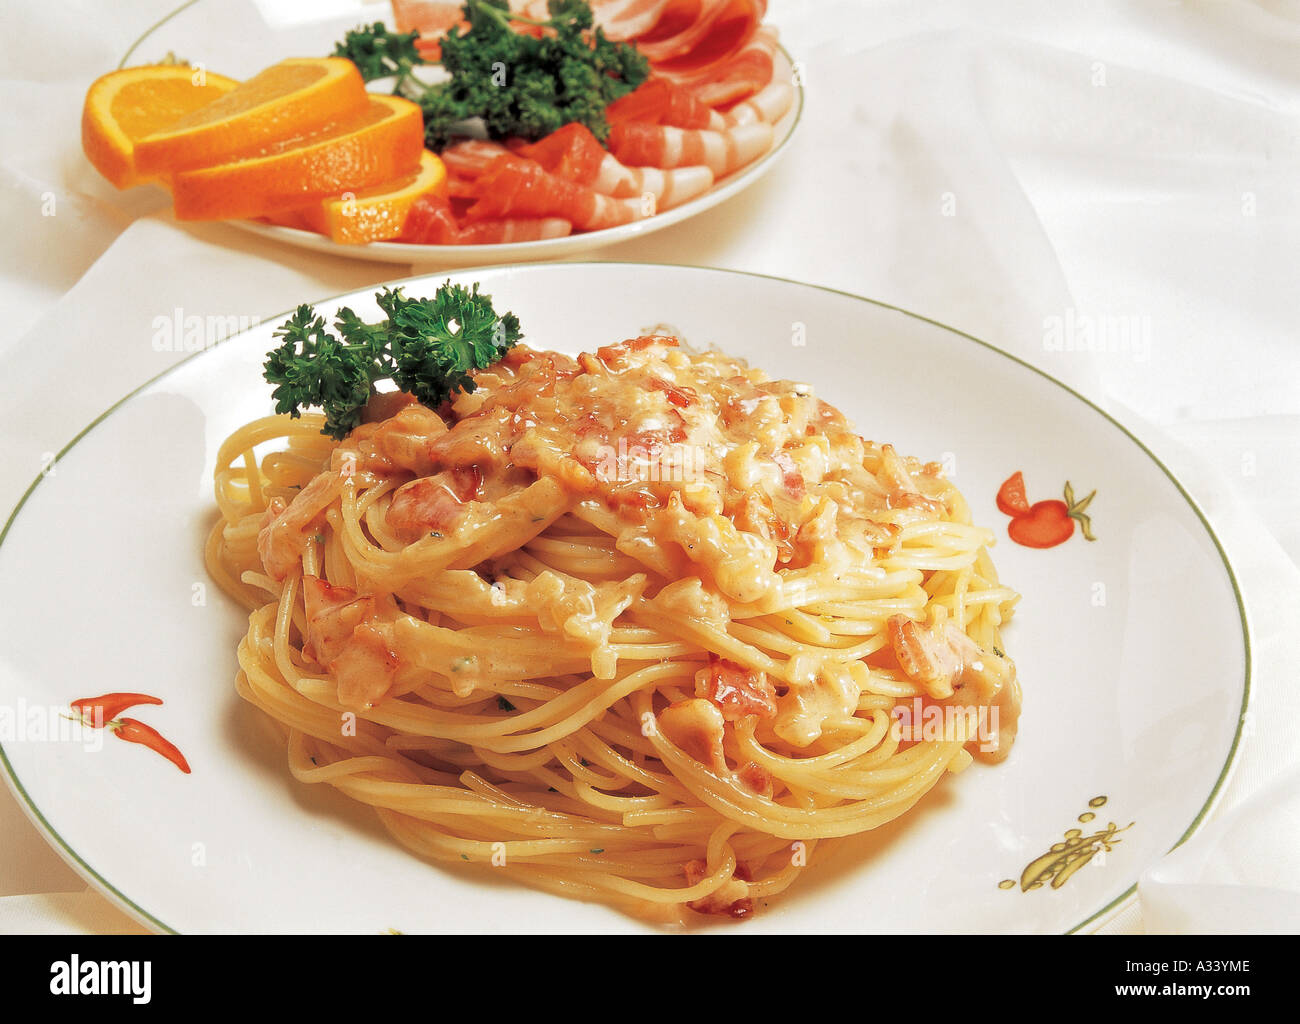 A closed view on a serve of spaghetti Stock Photo